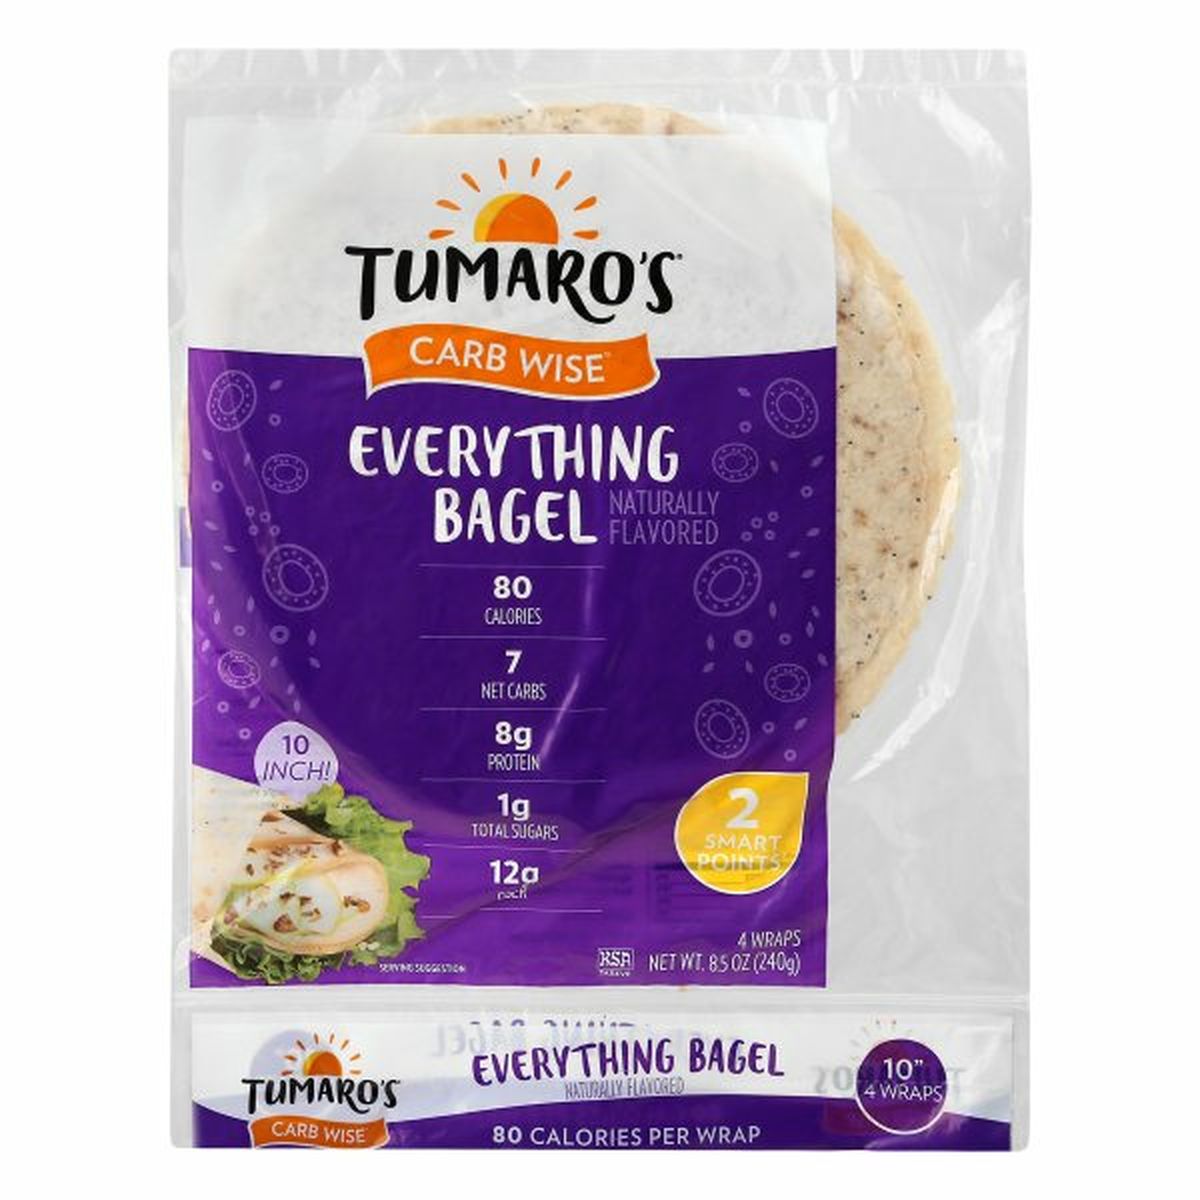 Calories in Tumaro's Carb Wise Wraps, Everything Bagel